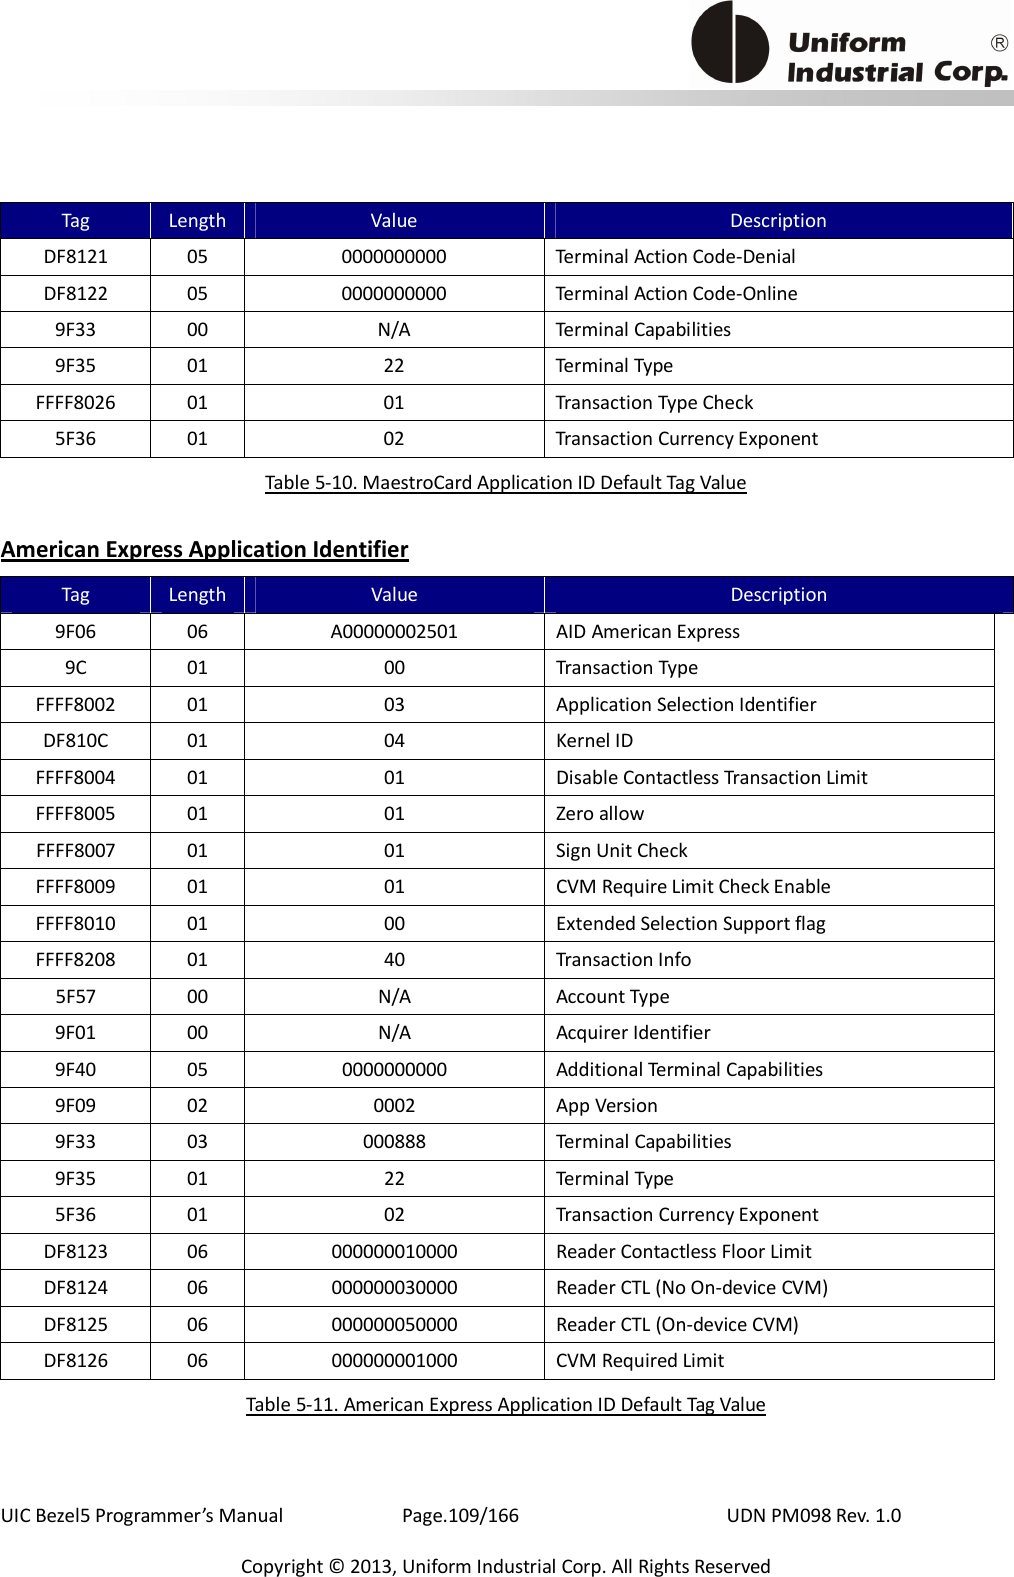                                           UIC Bezel5 Programmer’s Manual      Page.109/166                    UDN PM098 Rev. 1.0 Copyright © 2013, Uniform Industrial Corp. All Rights Reserved Tag  Length Value  Description DF8121  05  0000000000  Terminal Action Code-Denial DF8122  05  0000000000  Terminal Action Code-Online 9F33  00  N/A  Terminal Capabilities 9F35  01  22  Terminal Type   FFFF8026  01  01  Transaction Type Check 5F36  01  02  Transaction Currency Exponent Table 5-10. MaestroCard Application ID Default Tag Value American Express Application Identifier Tag  Length Value  Description 9F06  06  A00000002501  AID American Express 9C  01  00  Transaction Type FFFF8002  01  03  Application Selection Identifier DF810C  01  04  Kernel ID FFFF8004  01  01  Disable Contactless Transaction Limit FFFF8005  01  01  Zero allow FFFF8007  01  01  Sign Unit Check FFFF8009  01  01  CVM Require Limit Check Enable FFFF8010  01  00  Extended Selection Support flag FFFF8208  01  40  Transaction Info 5F57  00  N/A  Account Type 9F01  00  N/A  Acquirer Identifier 9F40  05  0000000000  Additional Terminal Capabilities 9F09  02  0002  App Version 9F33  03  000888  Terminal Capabilities 9F35  01  22  Terminal Type   5F36  01  02  Transaction Currency Exponent DF8123  06  000000010000  Reader Contactless Floor Limit DF8124  06  000000030000  Reader CTL (No On-device CVM) DF8125  06  000000050000  Reader CTL (On-device CVM) DF8126  06  000000001000  CVM Required Limit Table 5-11. American Express Application ID Default Tag Value 